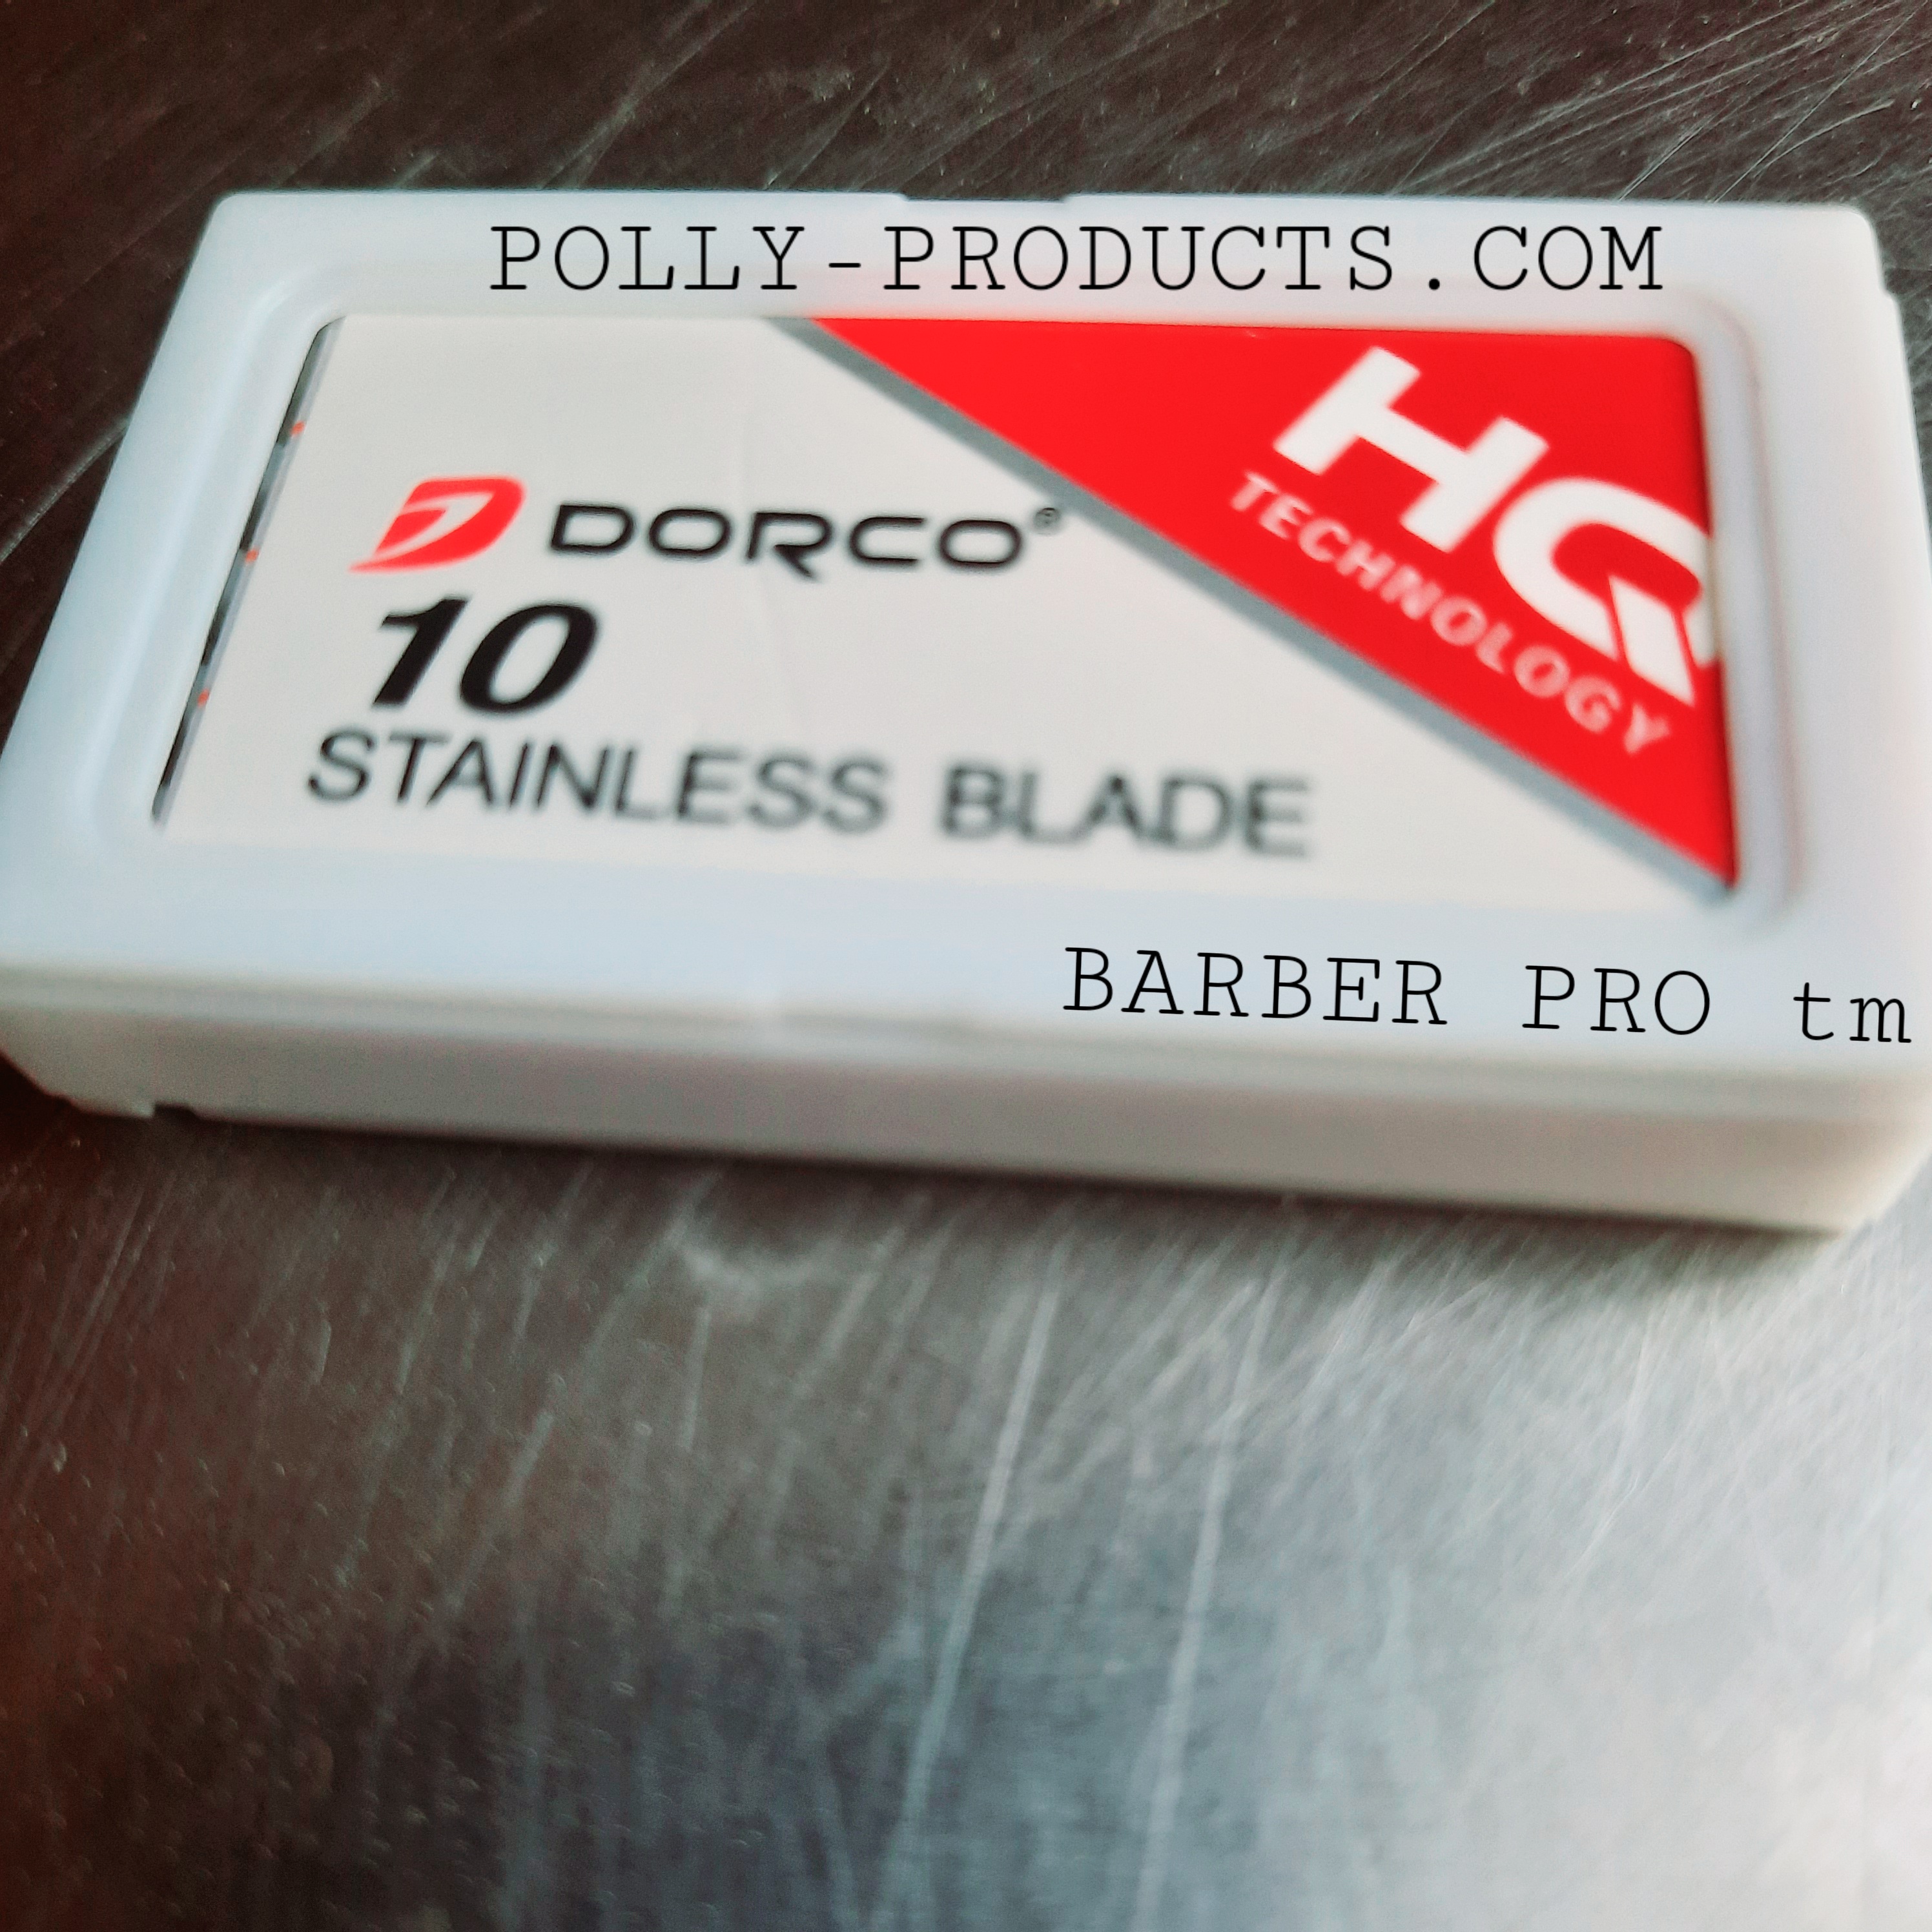 BARBER PRO tm WHOLESALE DORCO BLADES #DB301 FROM POLLY PRODUCTS 